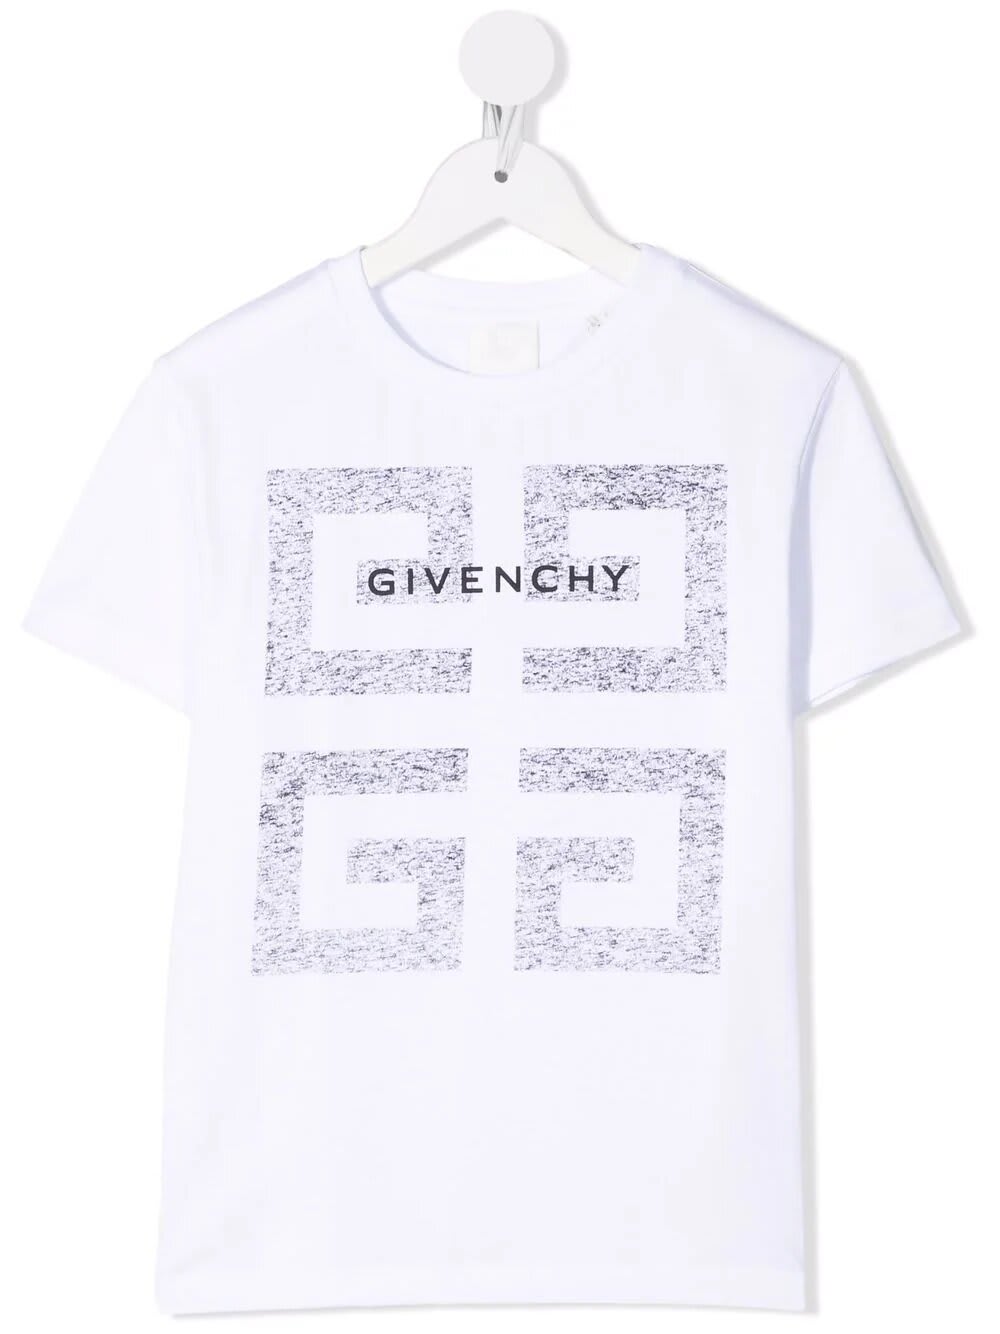 Kids White T-shirt With Maxi Givenchy 4g Print